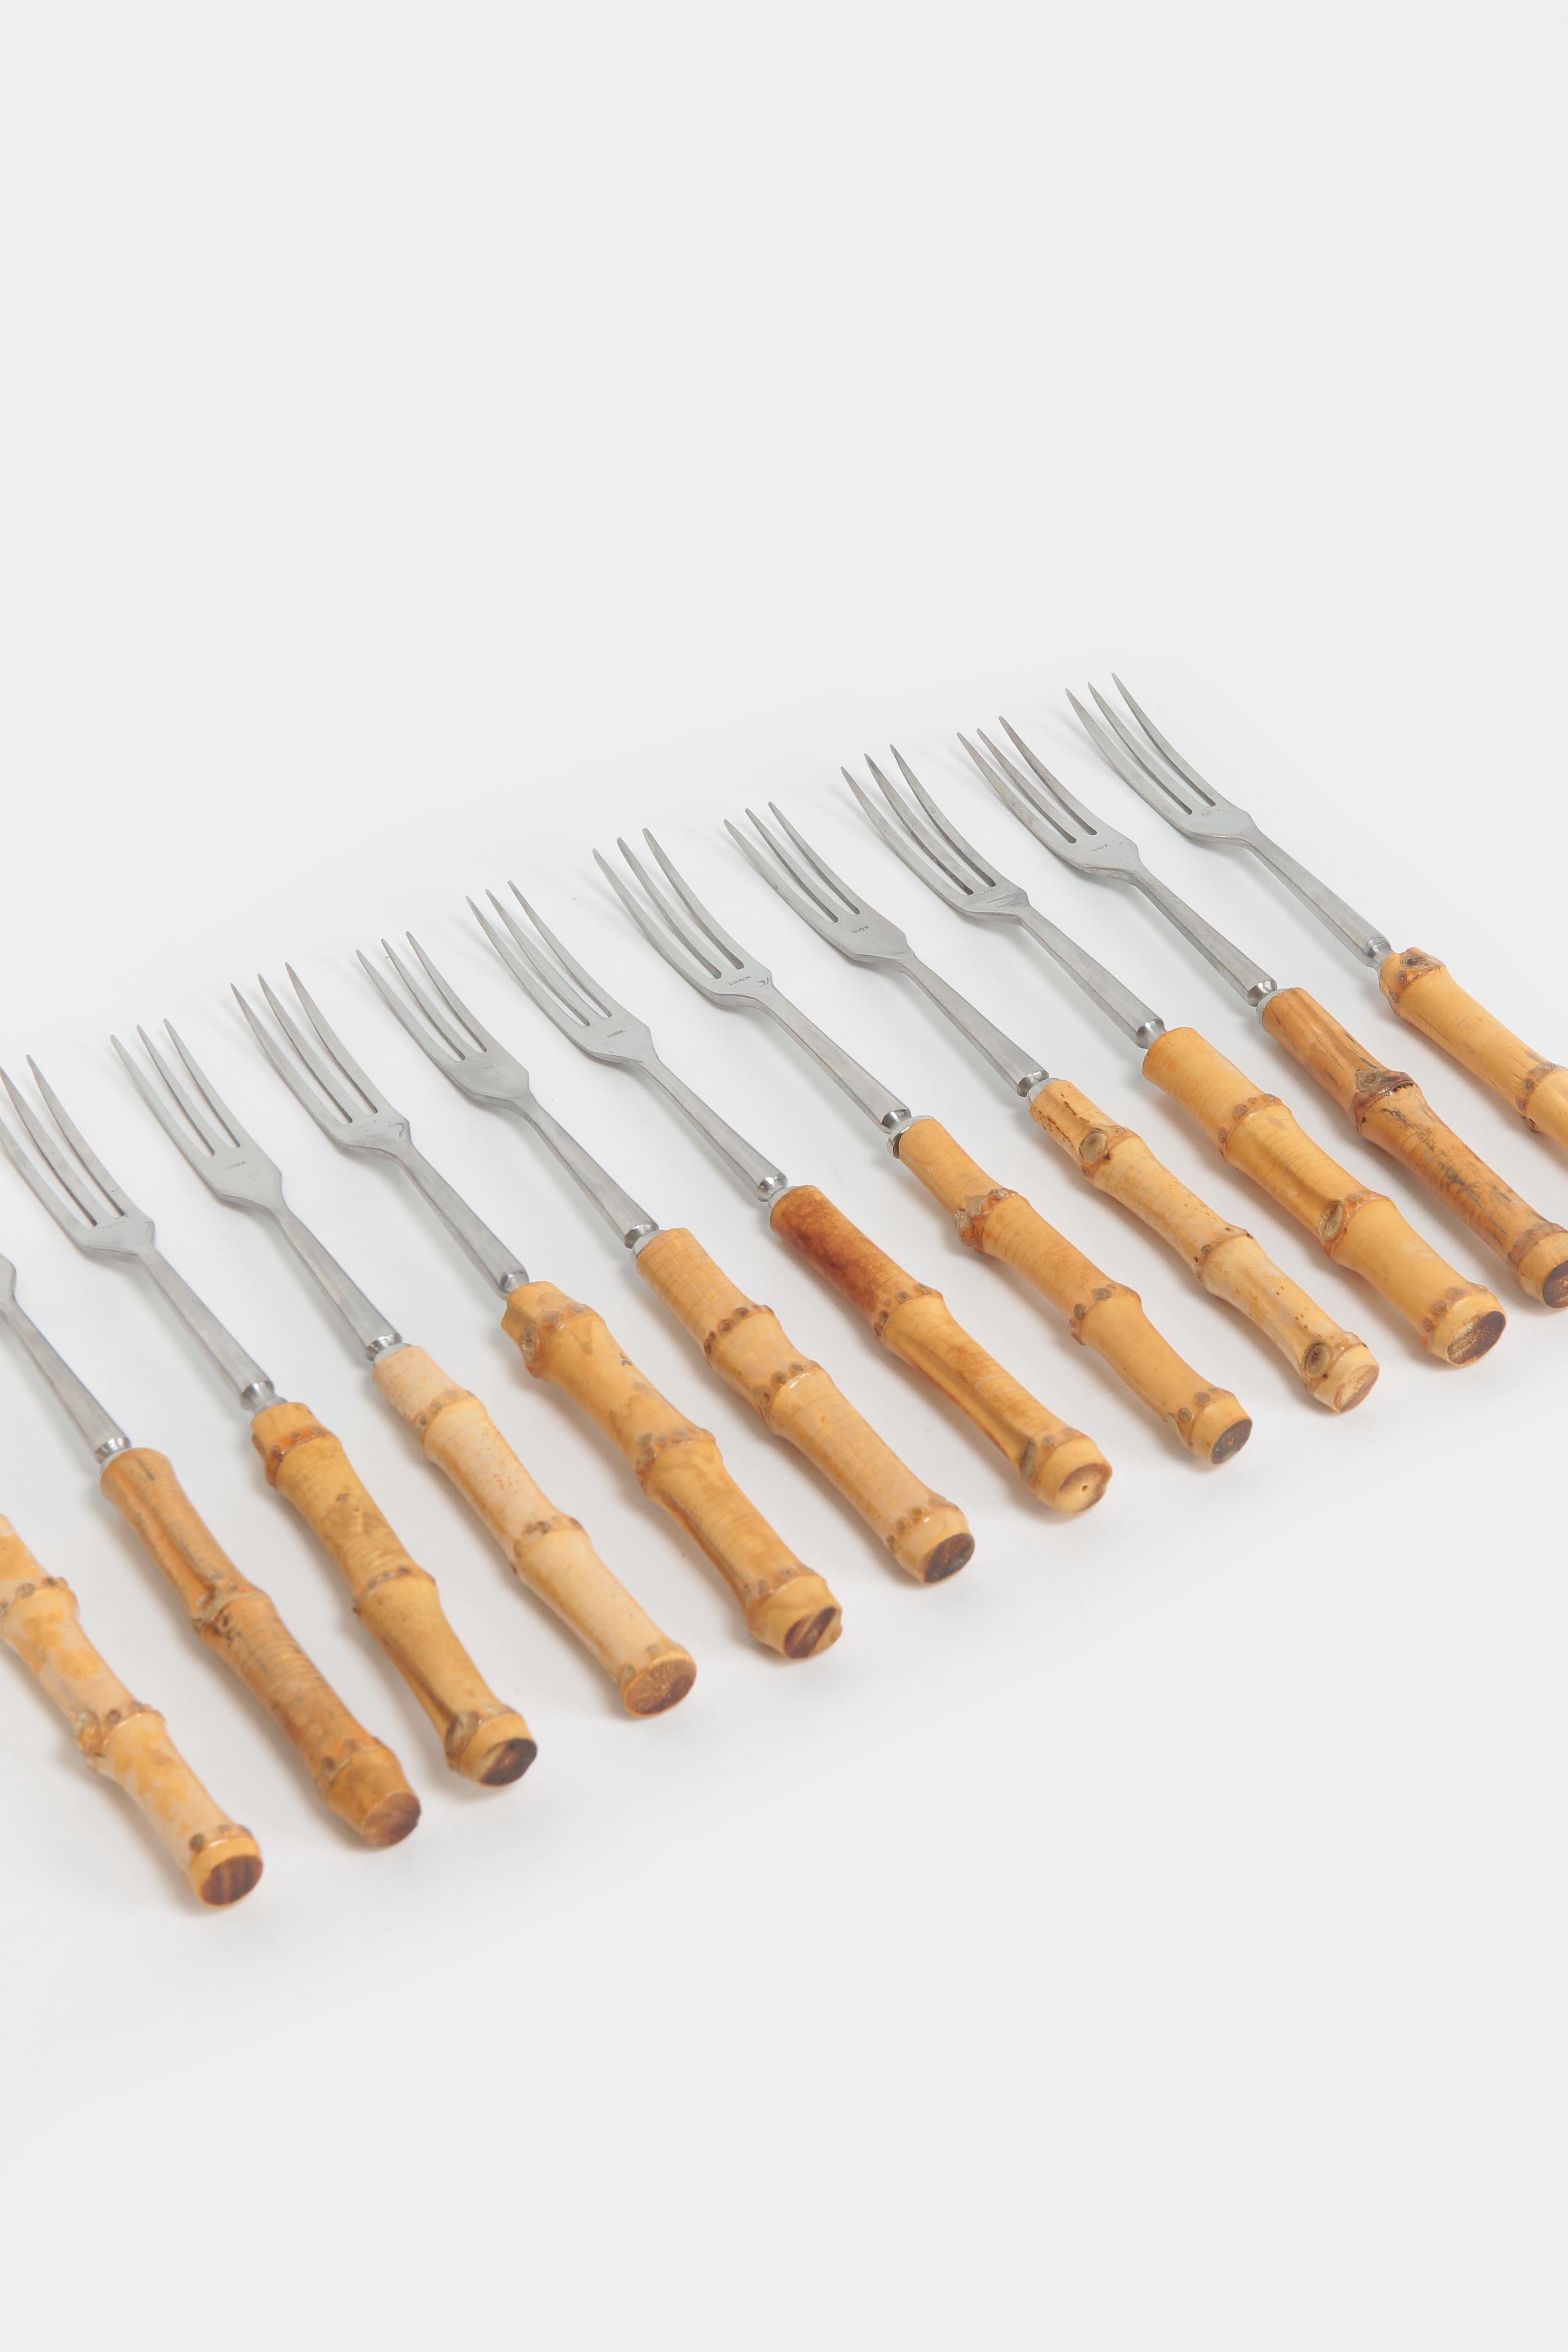 12 Swiss fondue forks made of chrome steel with bamboo handles made in the 1950s. Marked with INOX on the front.